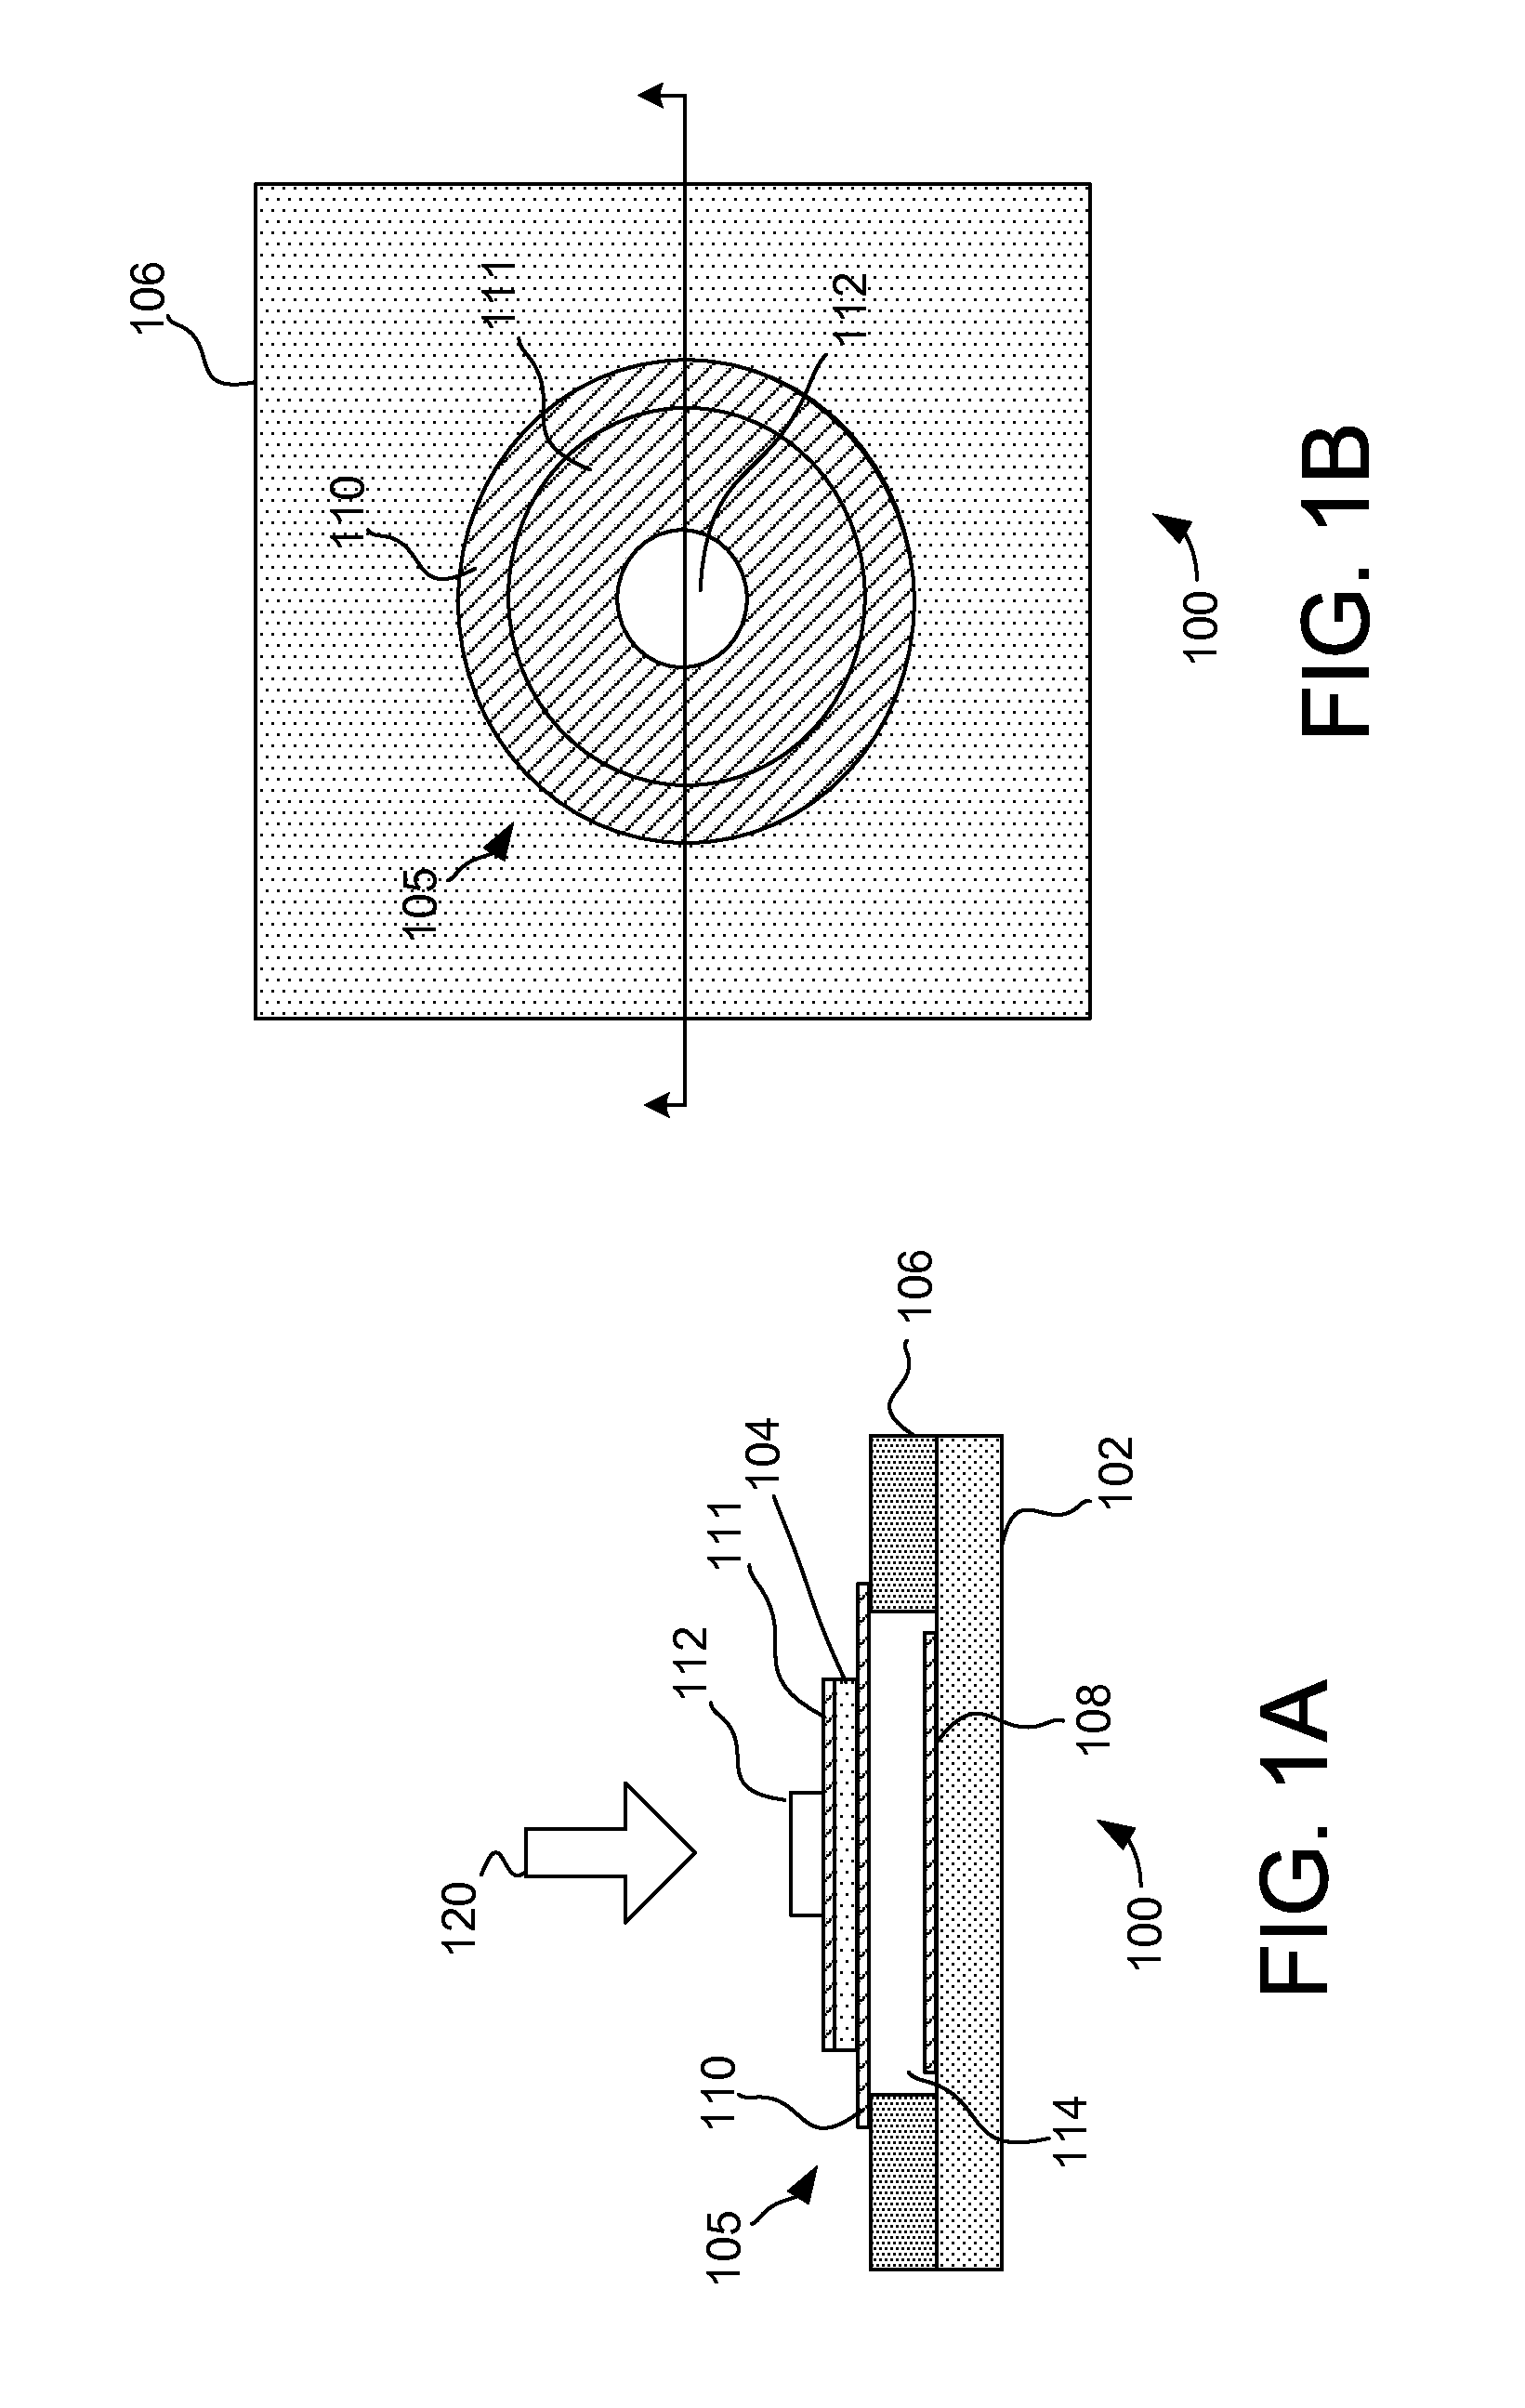 Input device with force sensing and haptic response